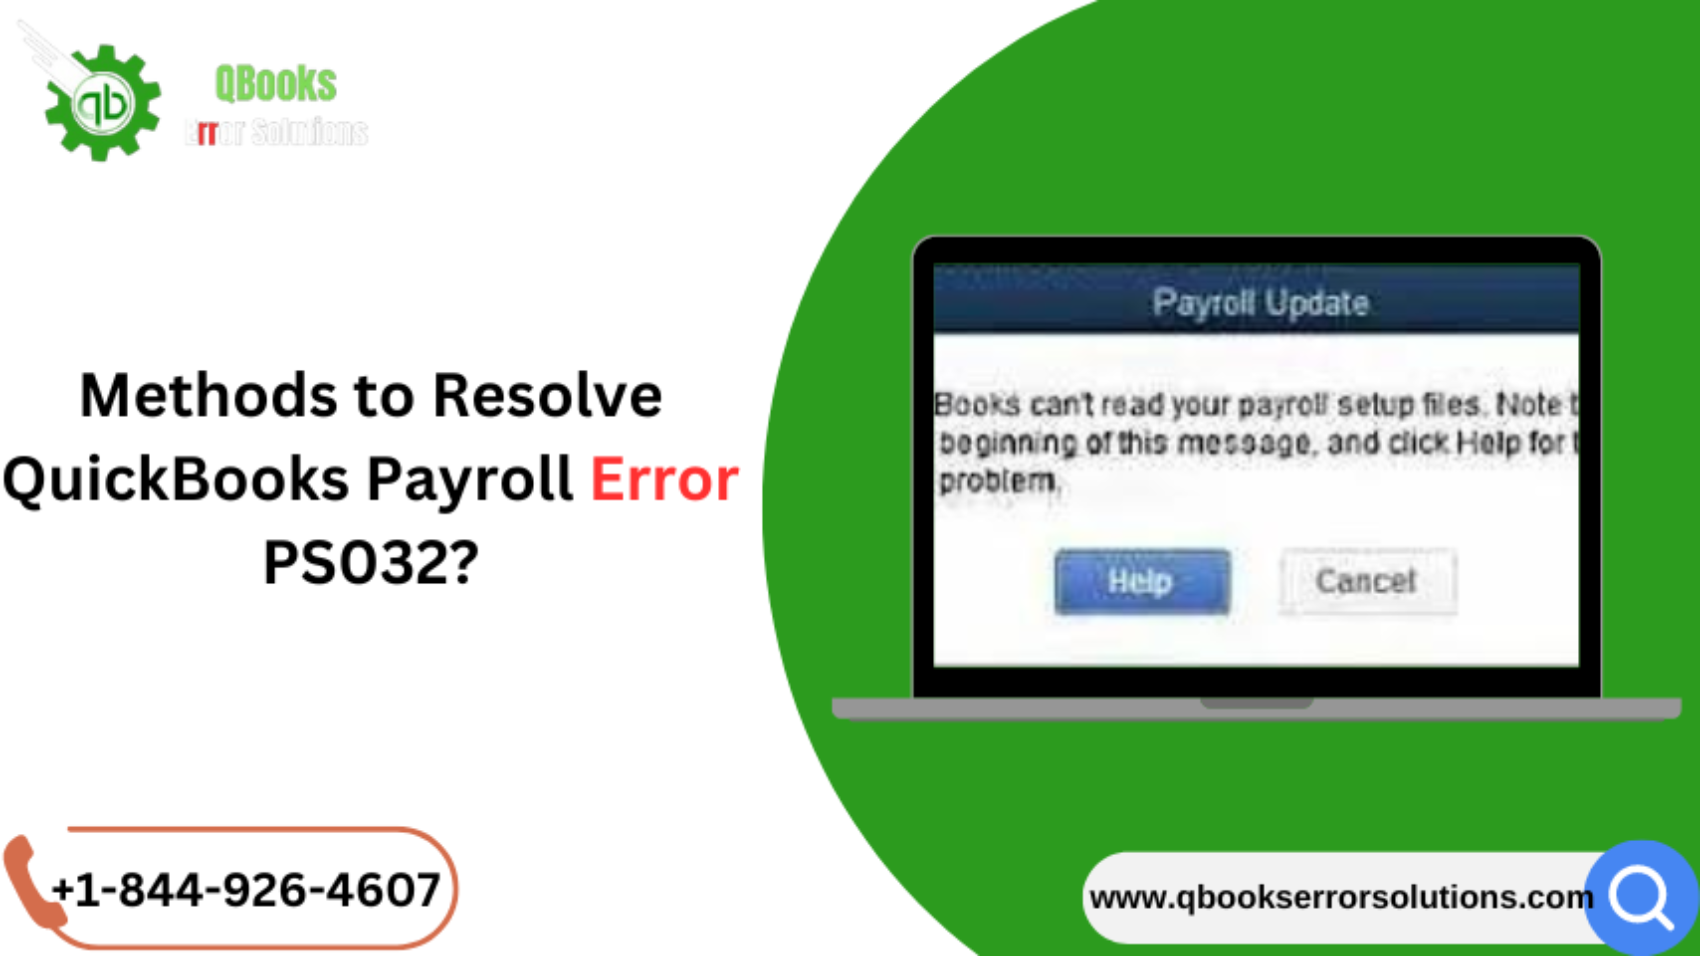 How to Resolve QuickBooks Payroll Error PS032